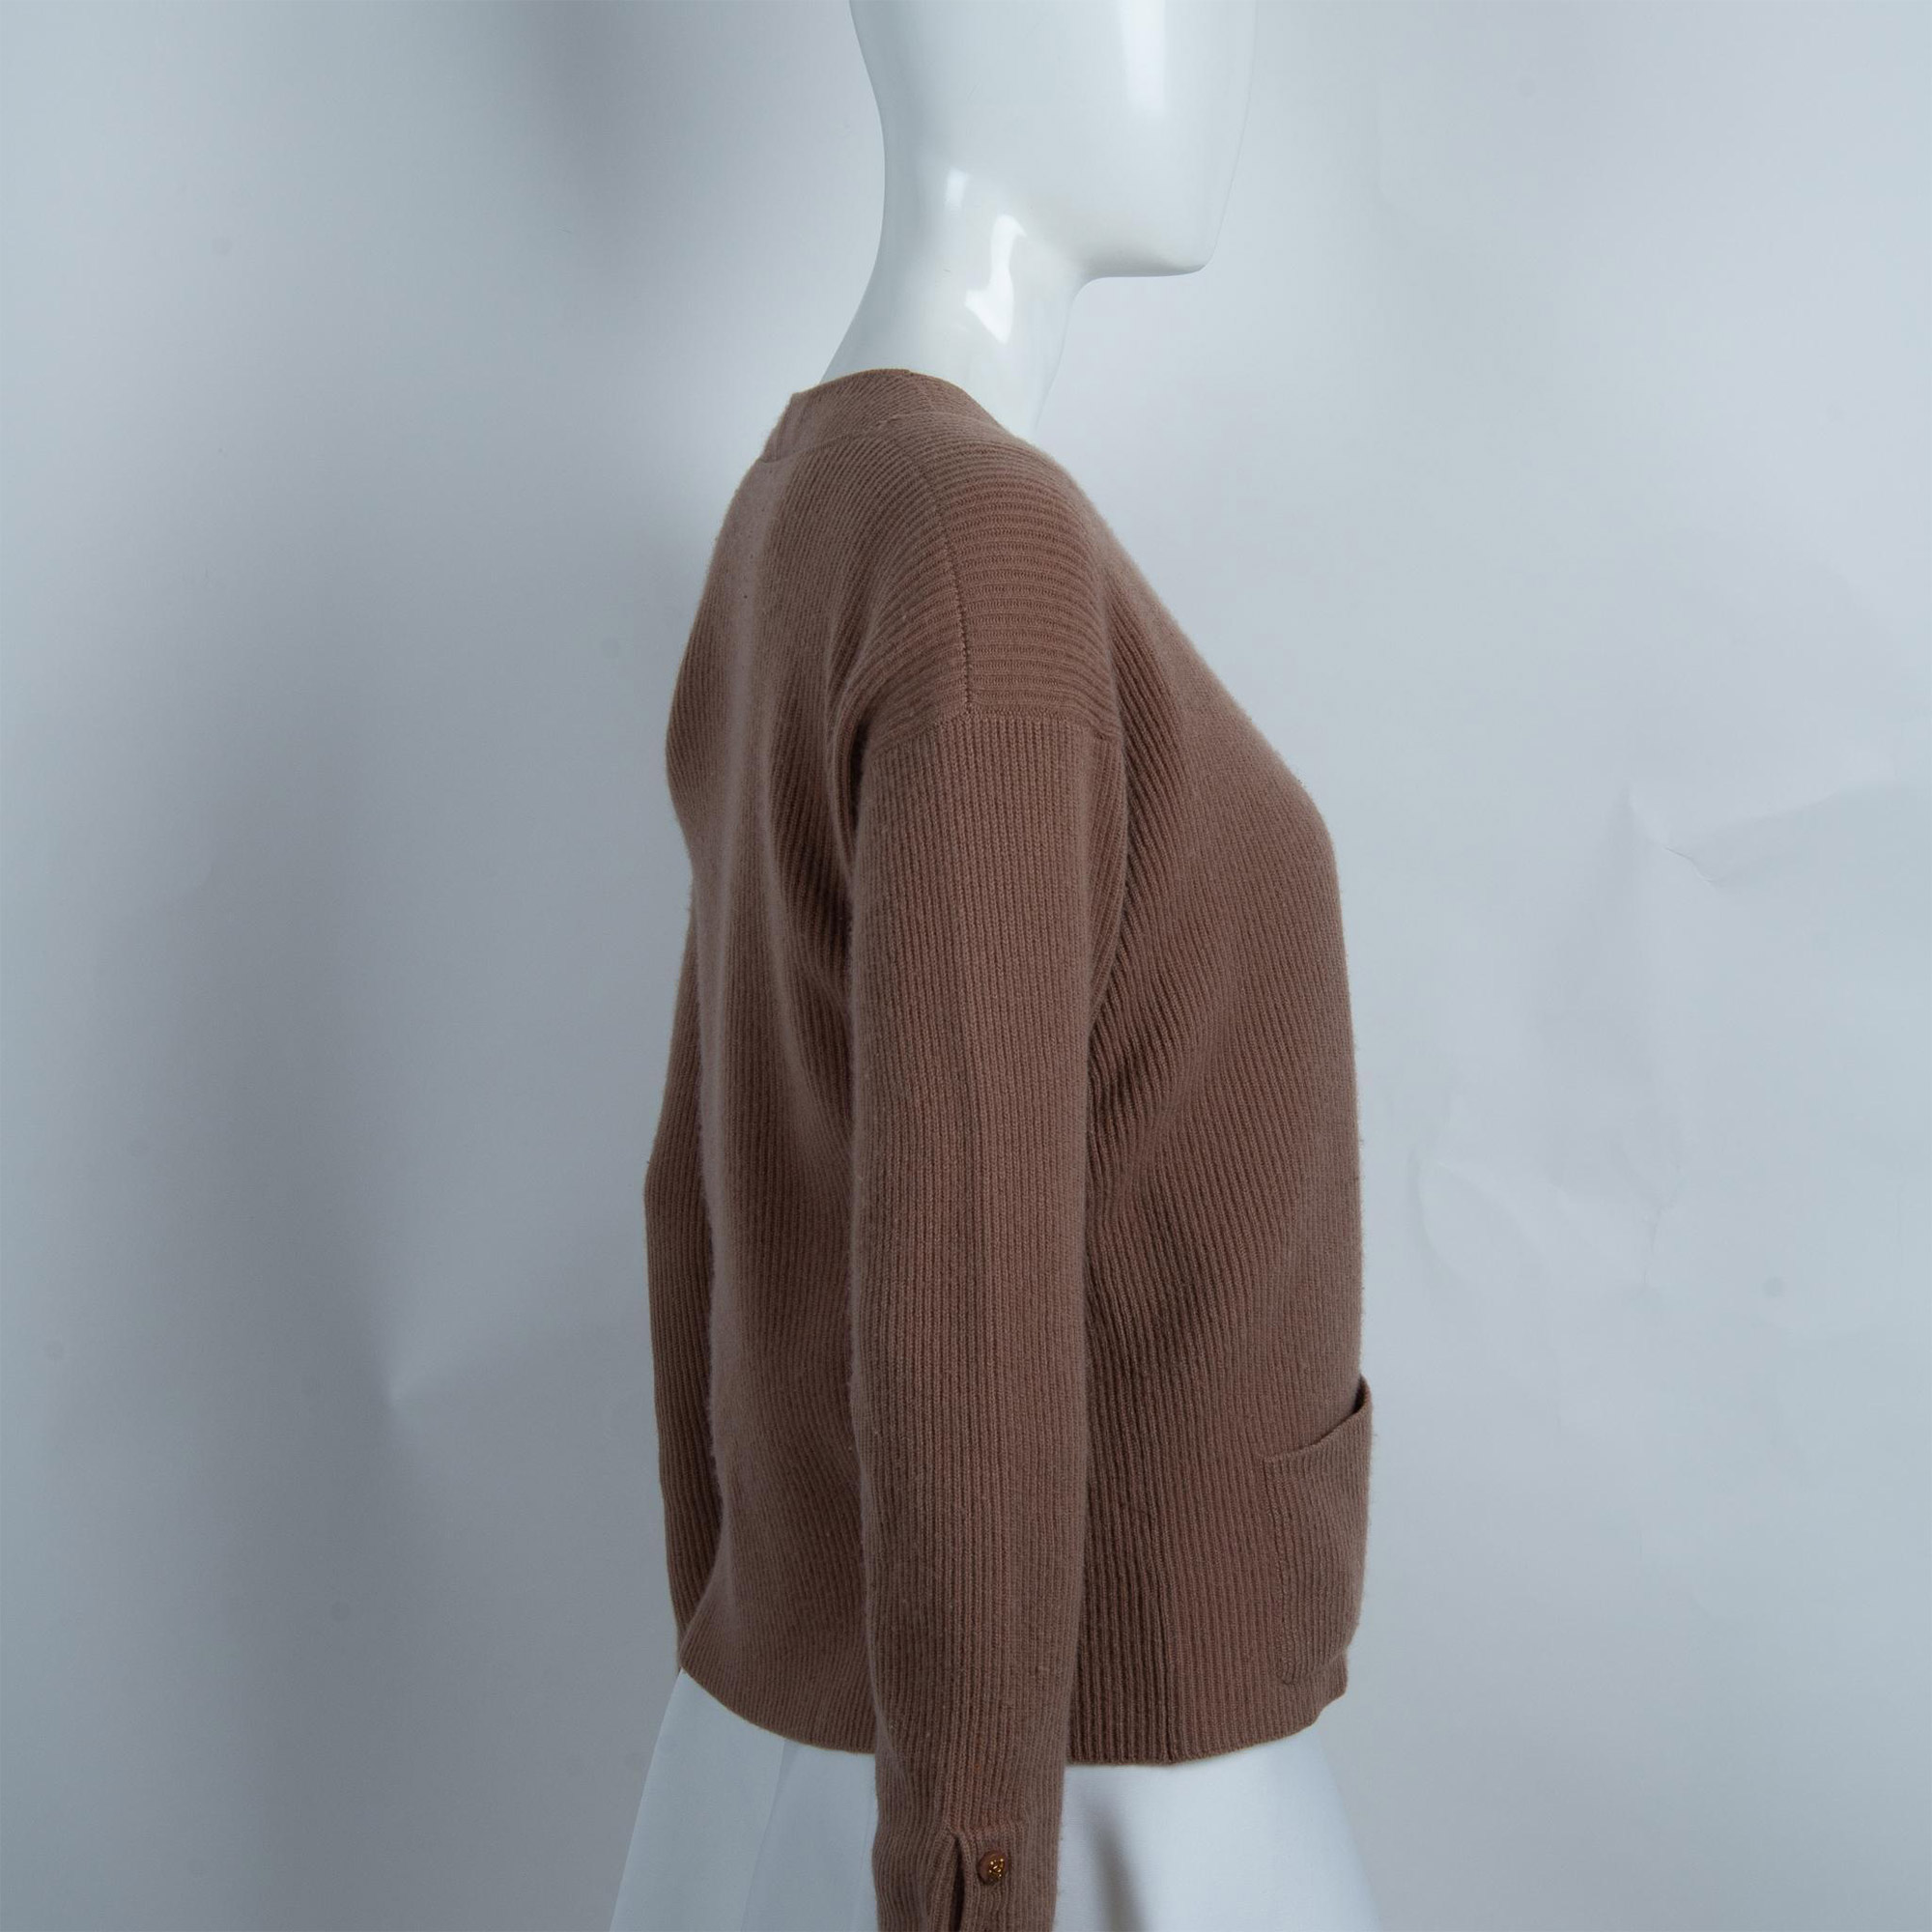 2pc Vintage Coco Chanel Cardigan Set, Size S - Image 5 of 10